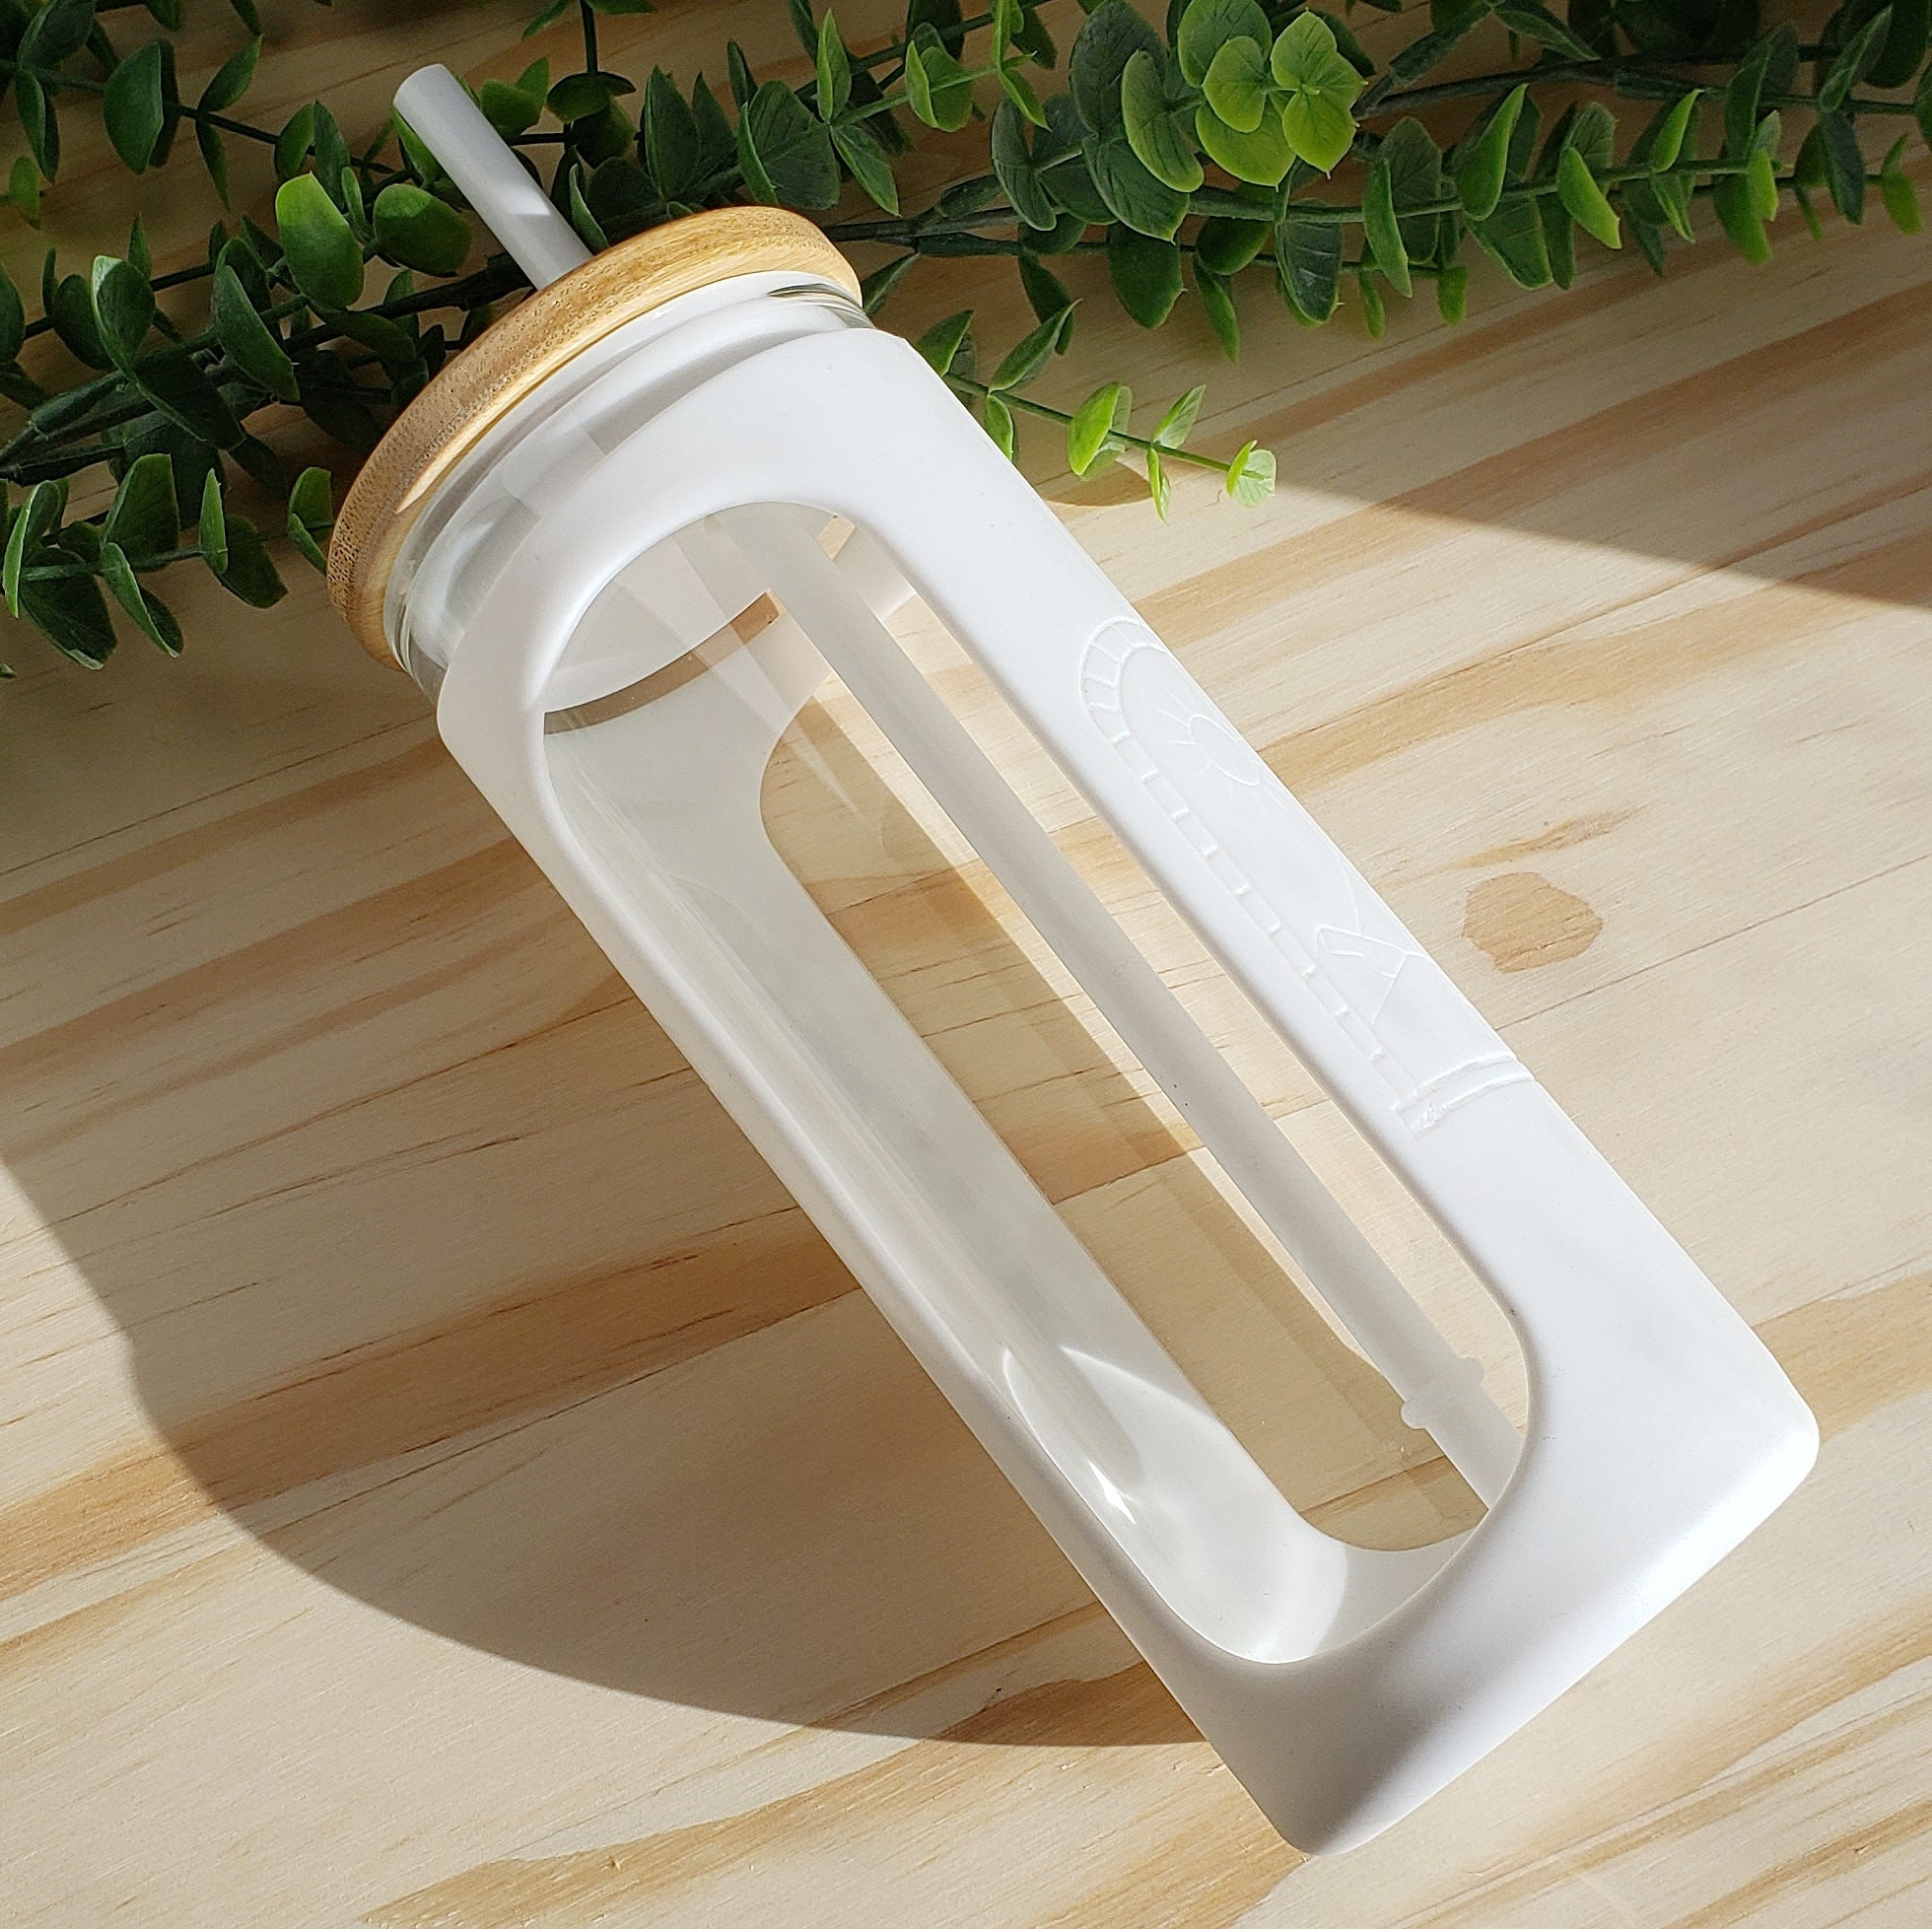 Customized Molded Best Silicone Glass Water Drinking Bottle Sleeve